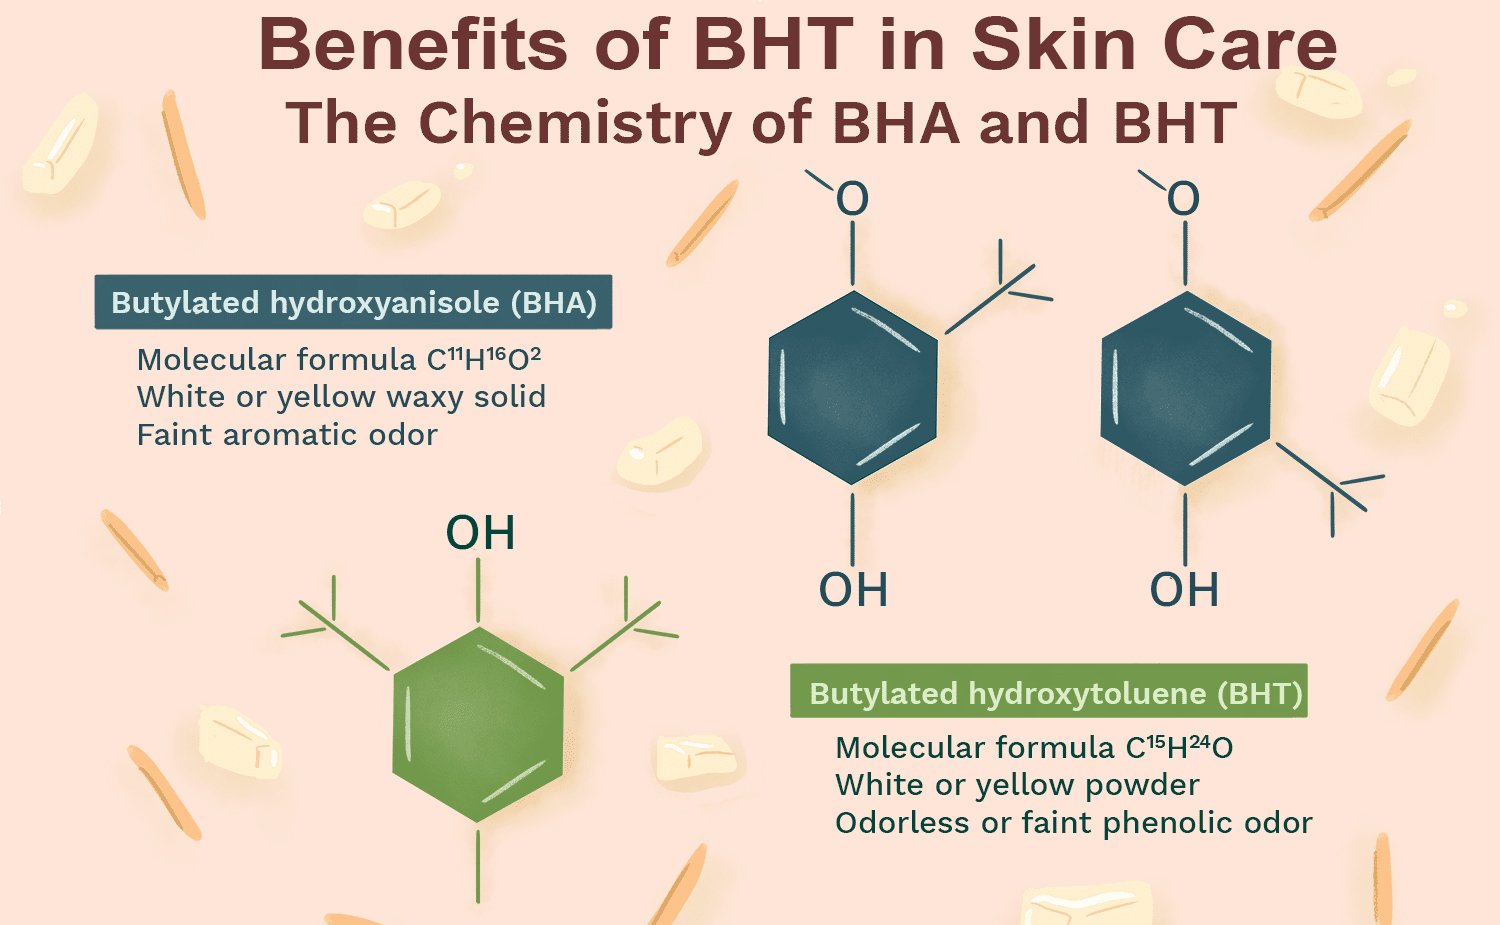 Benefits of BHT in Skin Care Anti-Aging, Acne Sunscreen